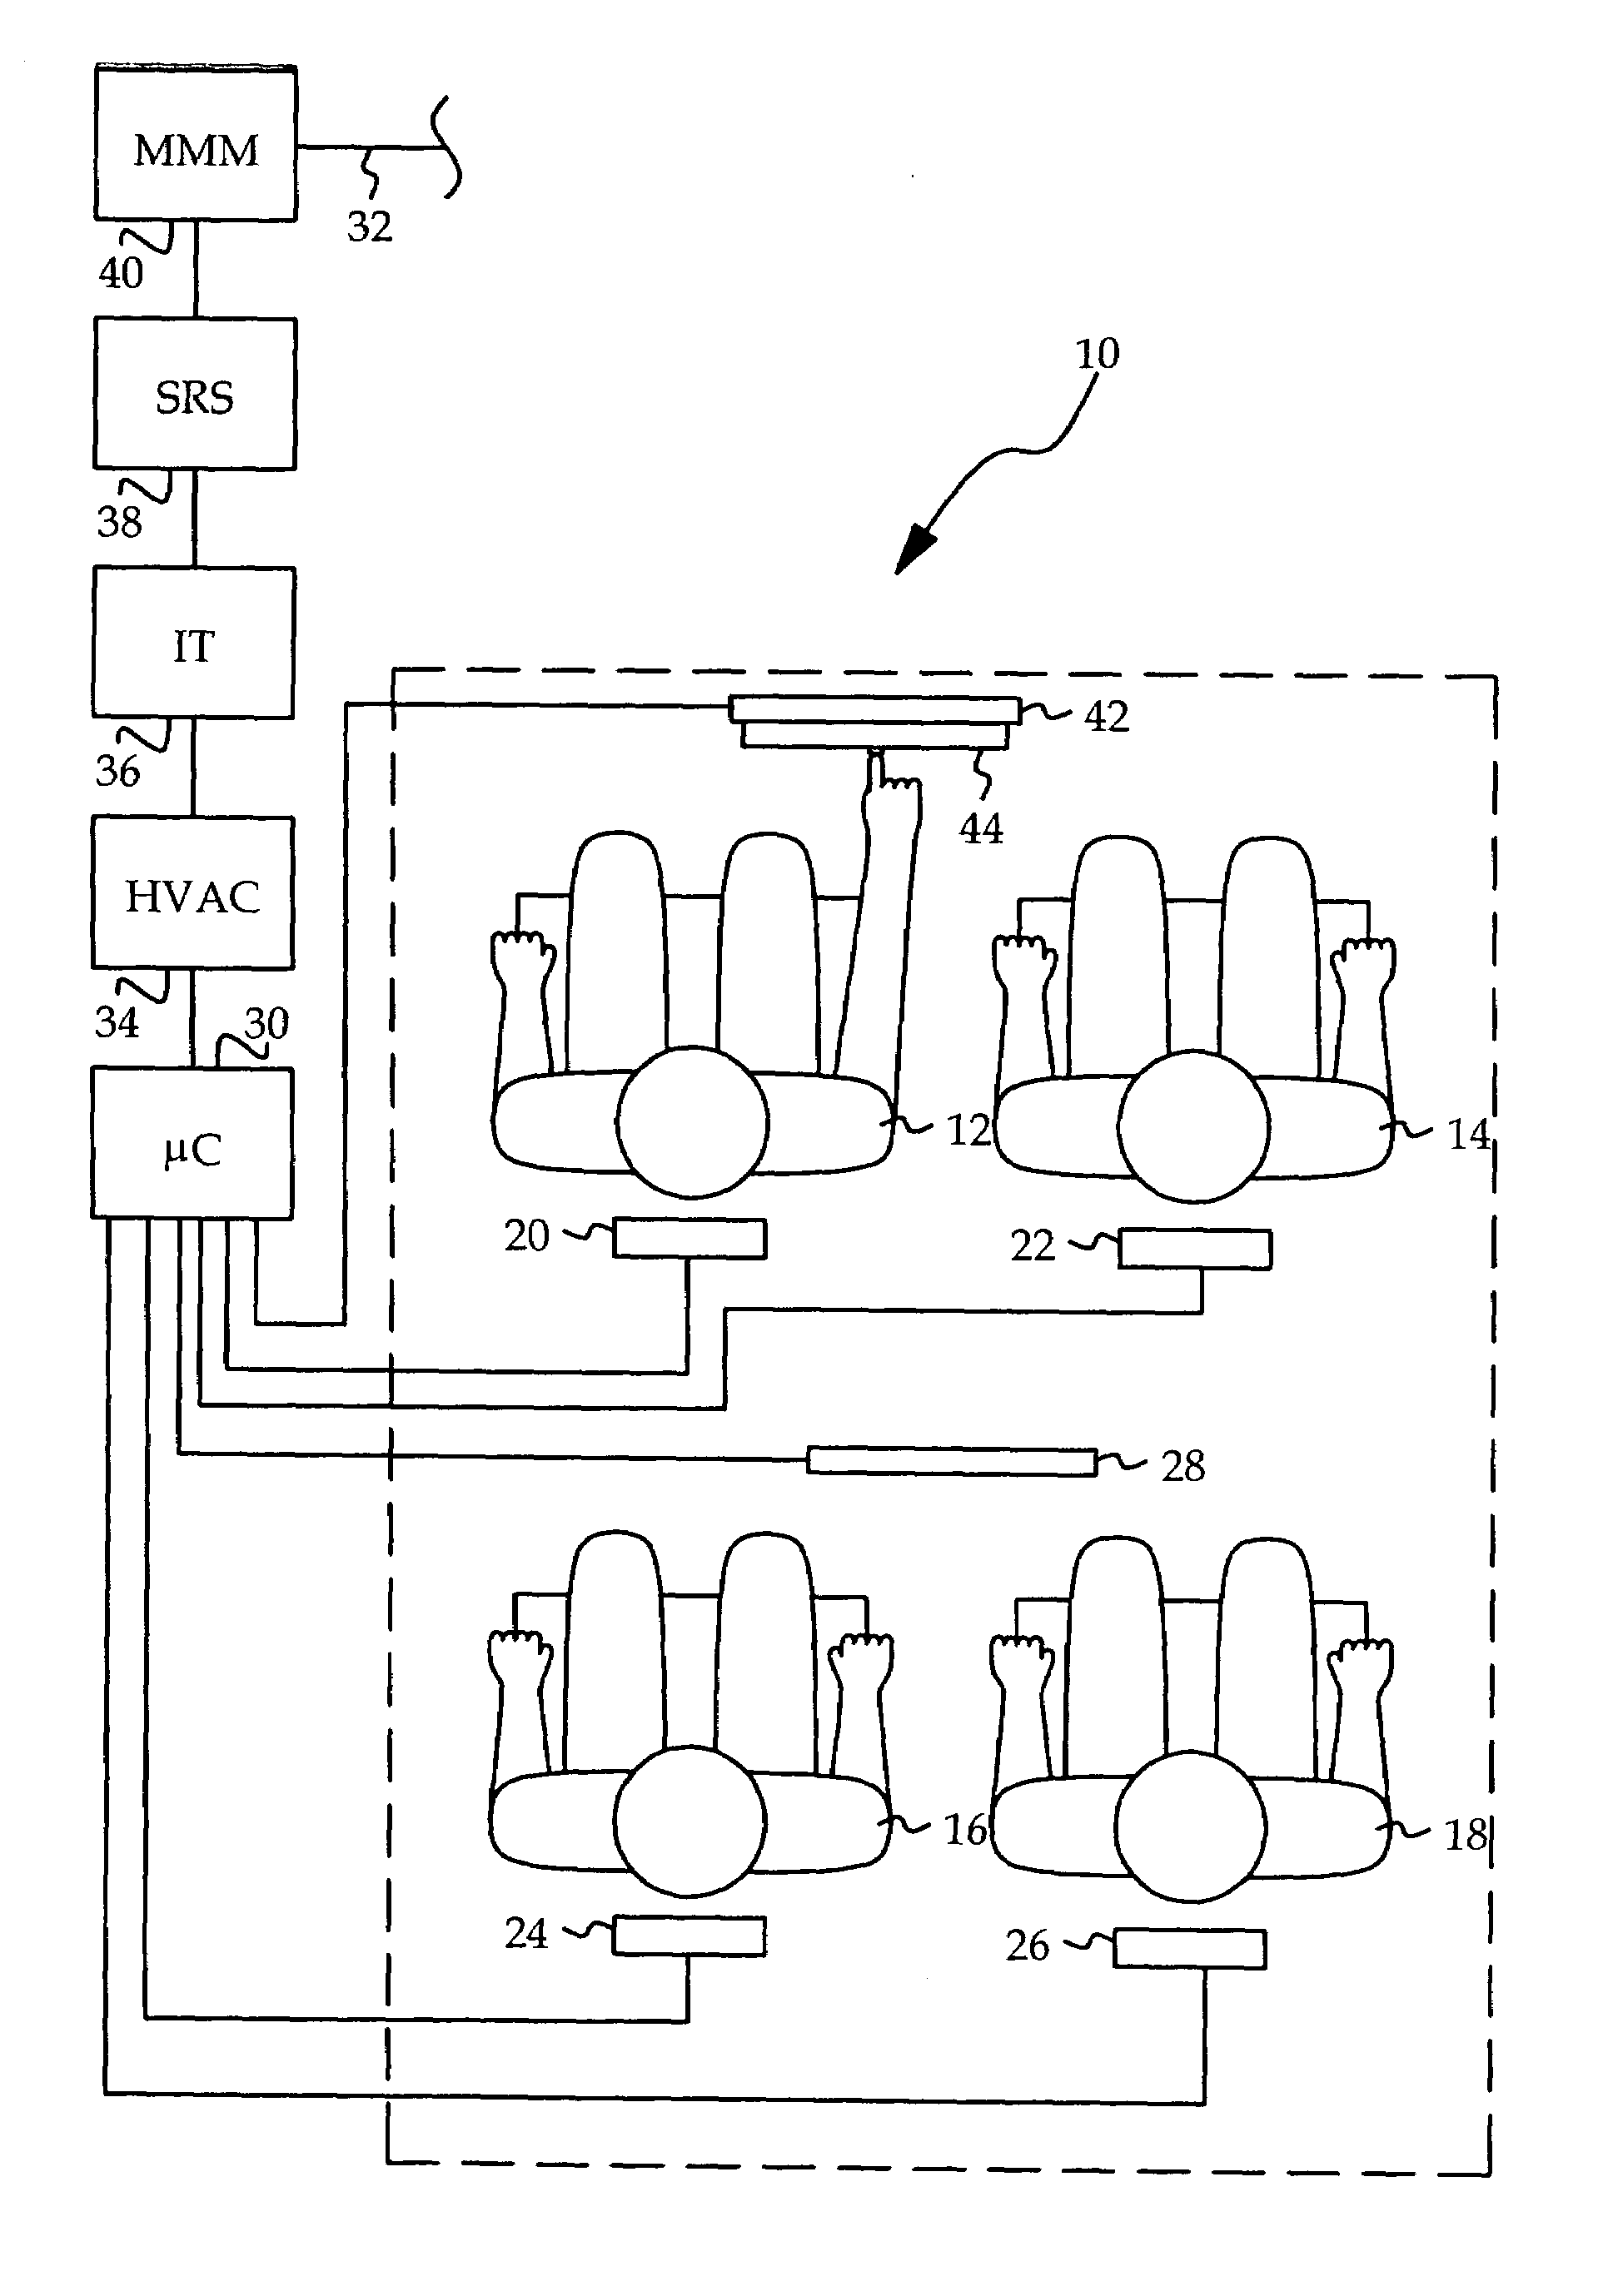 Universal occupant detection and discrimination system for a multi-place vehicle